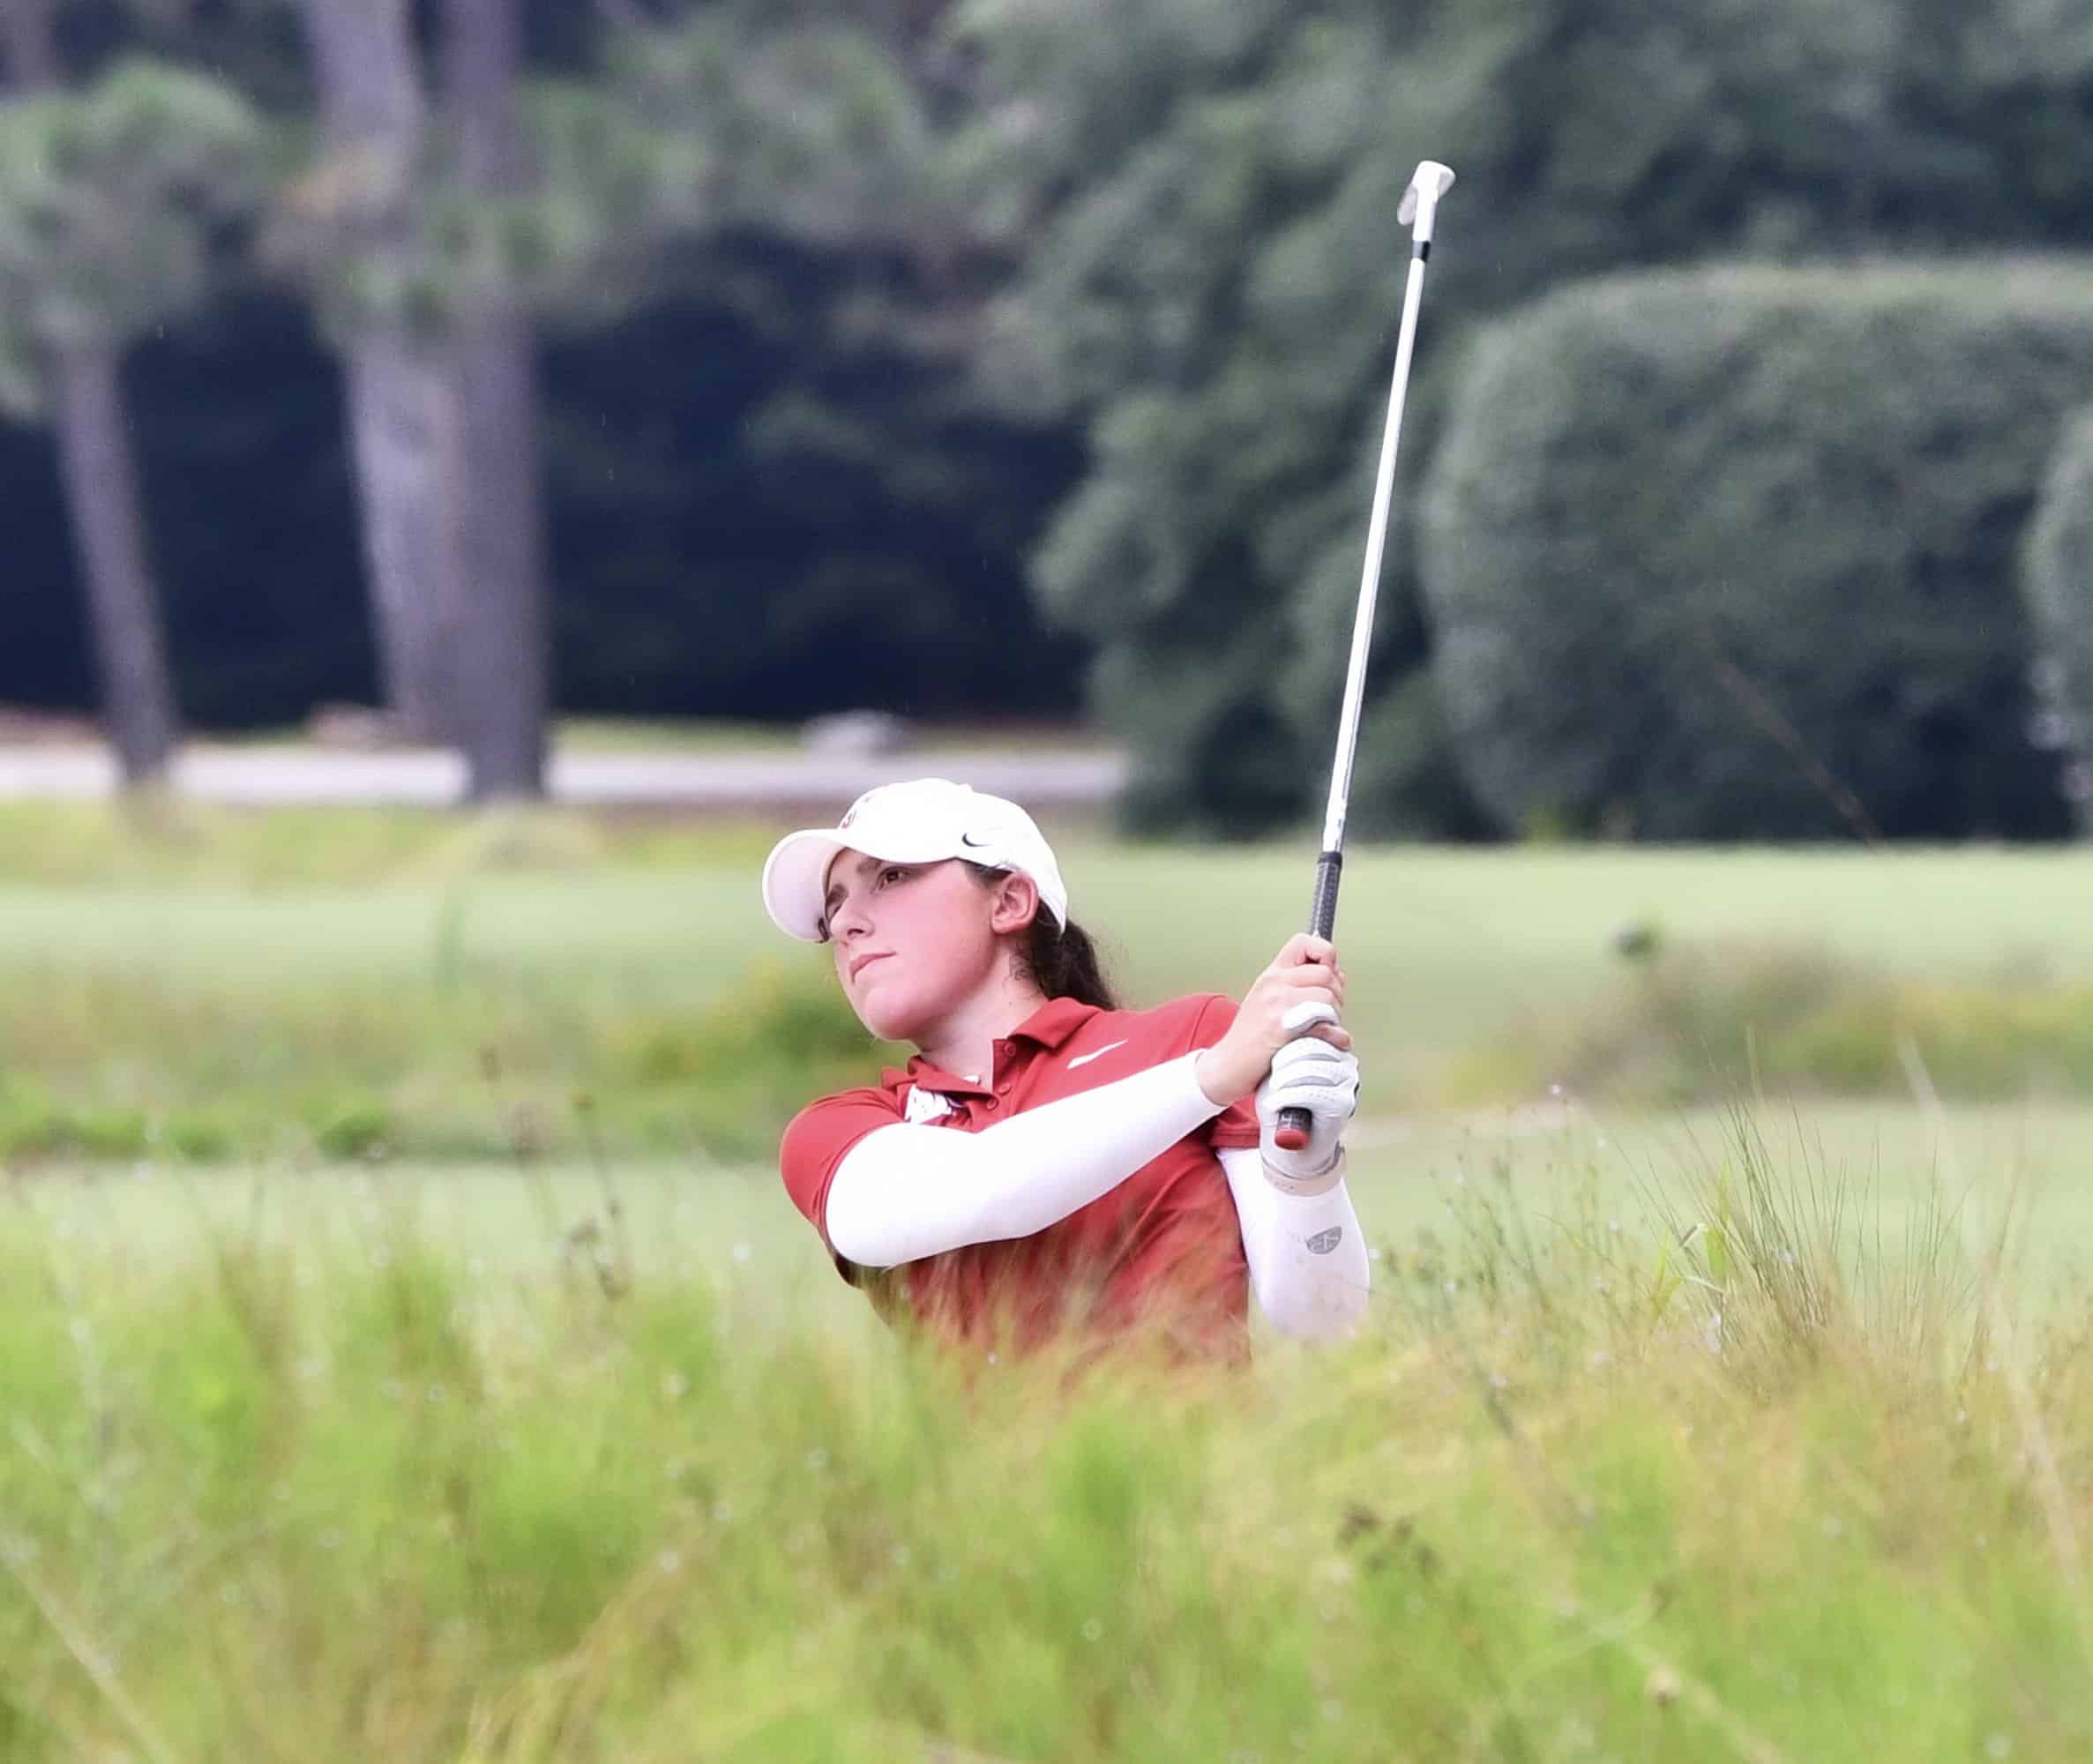 Madelyn Gamble plays an approach shot during the championship match of the Women's North & South Amateur. (Photo by Melissa Schaub)